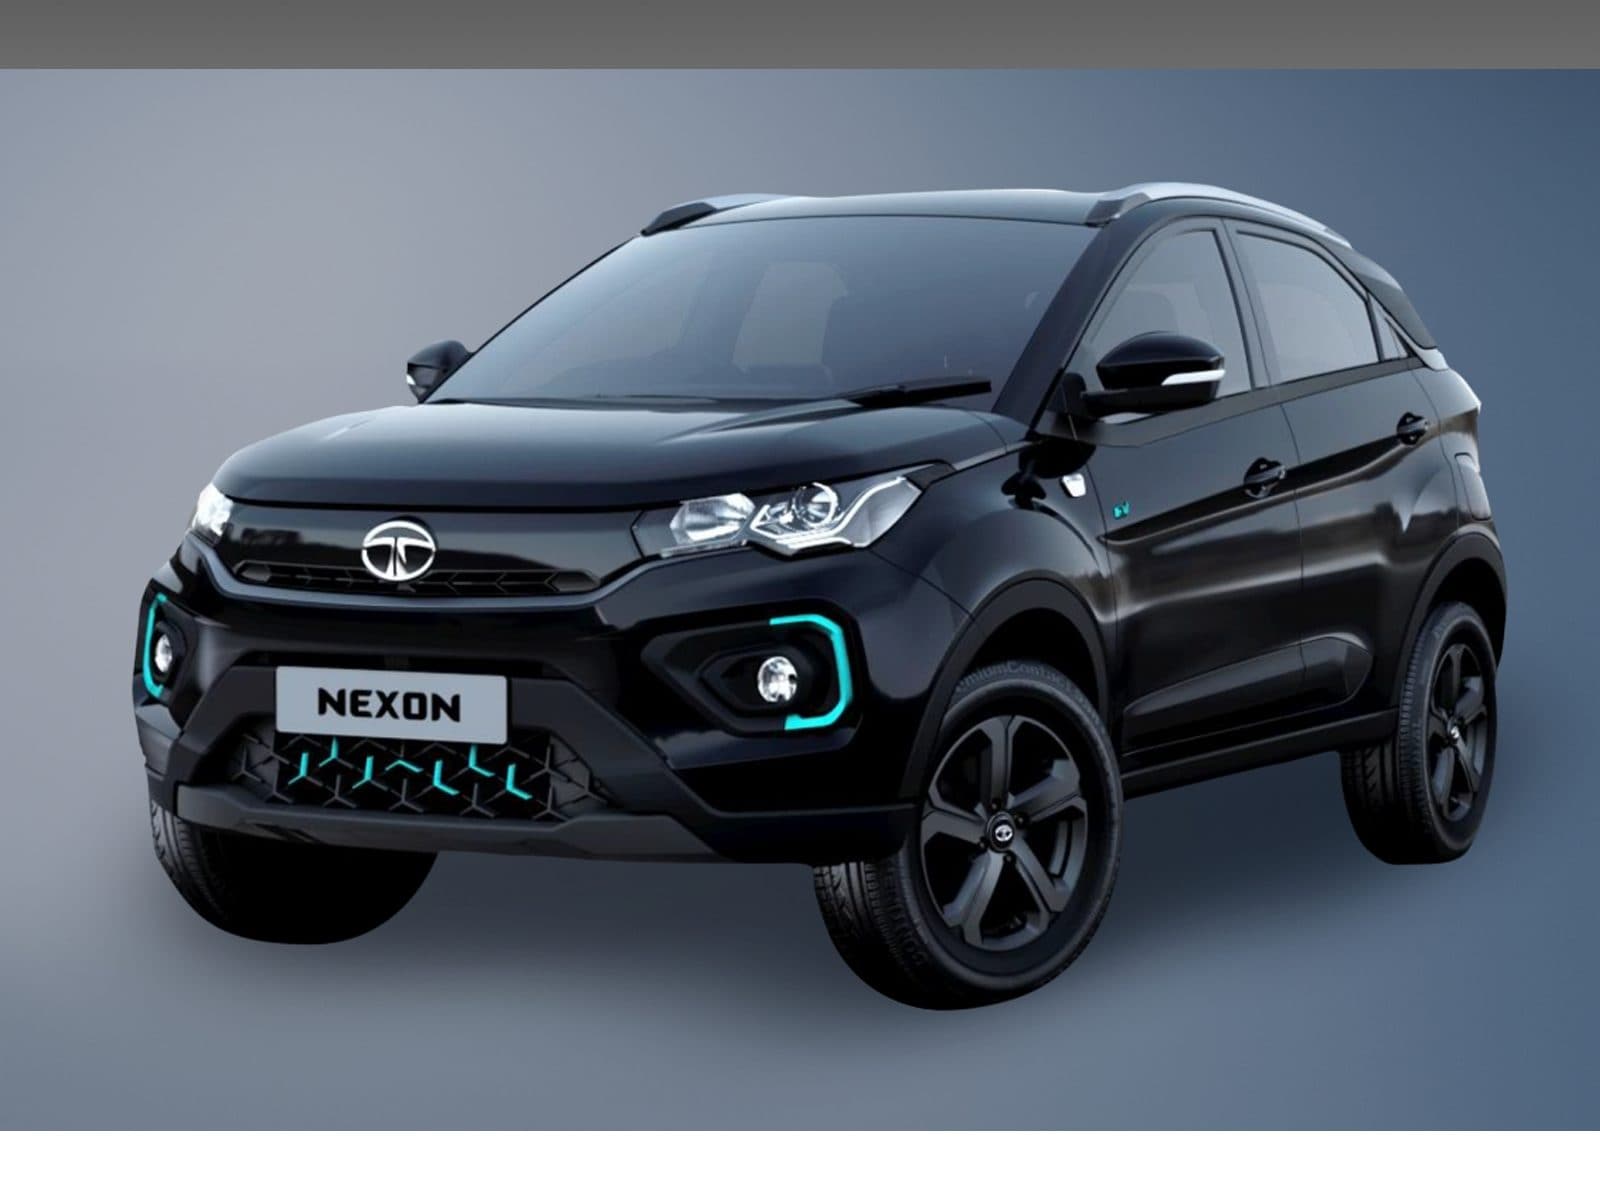 Tata Nexon EV Price Increased by Rs 25,000, Here's the Latest Price List